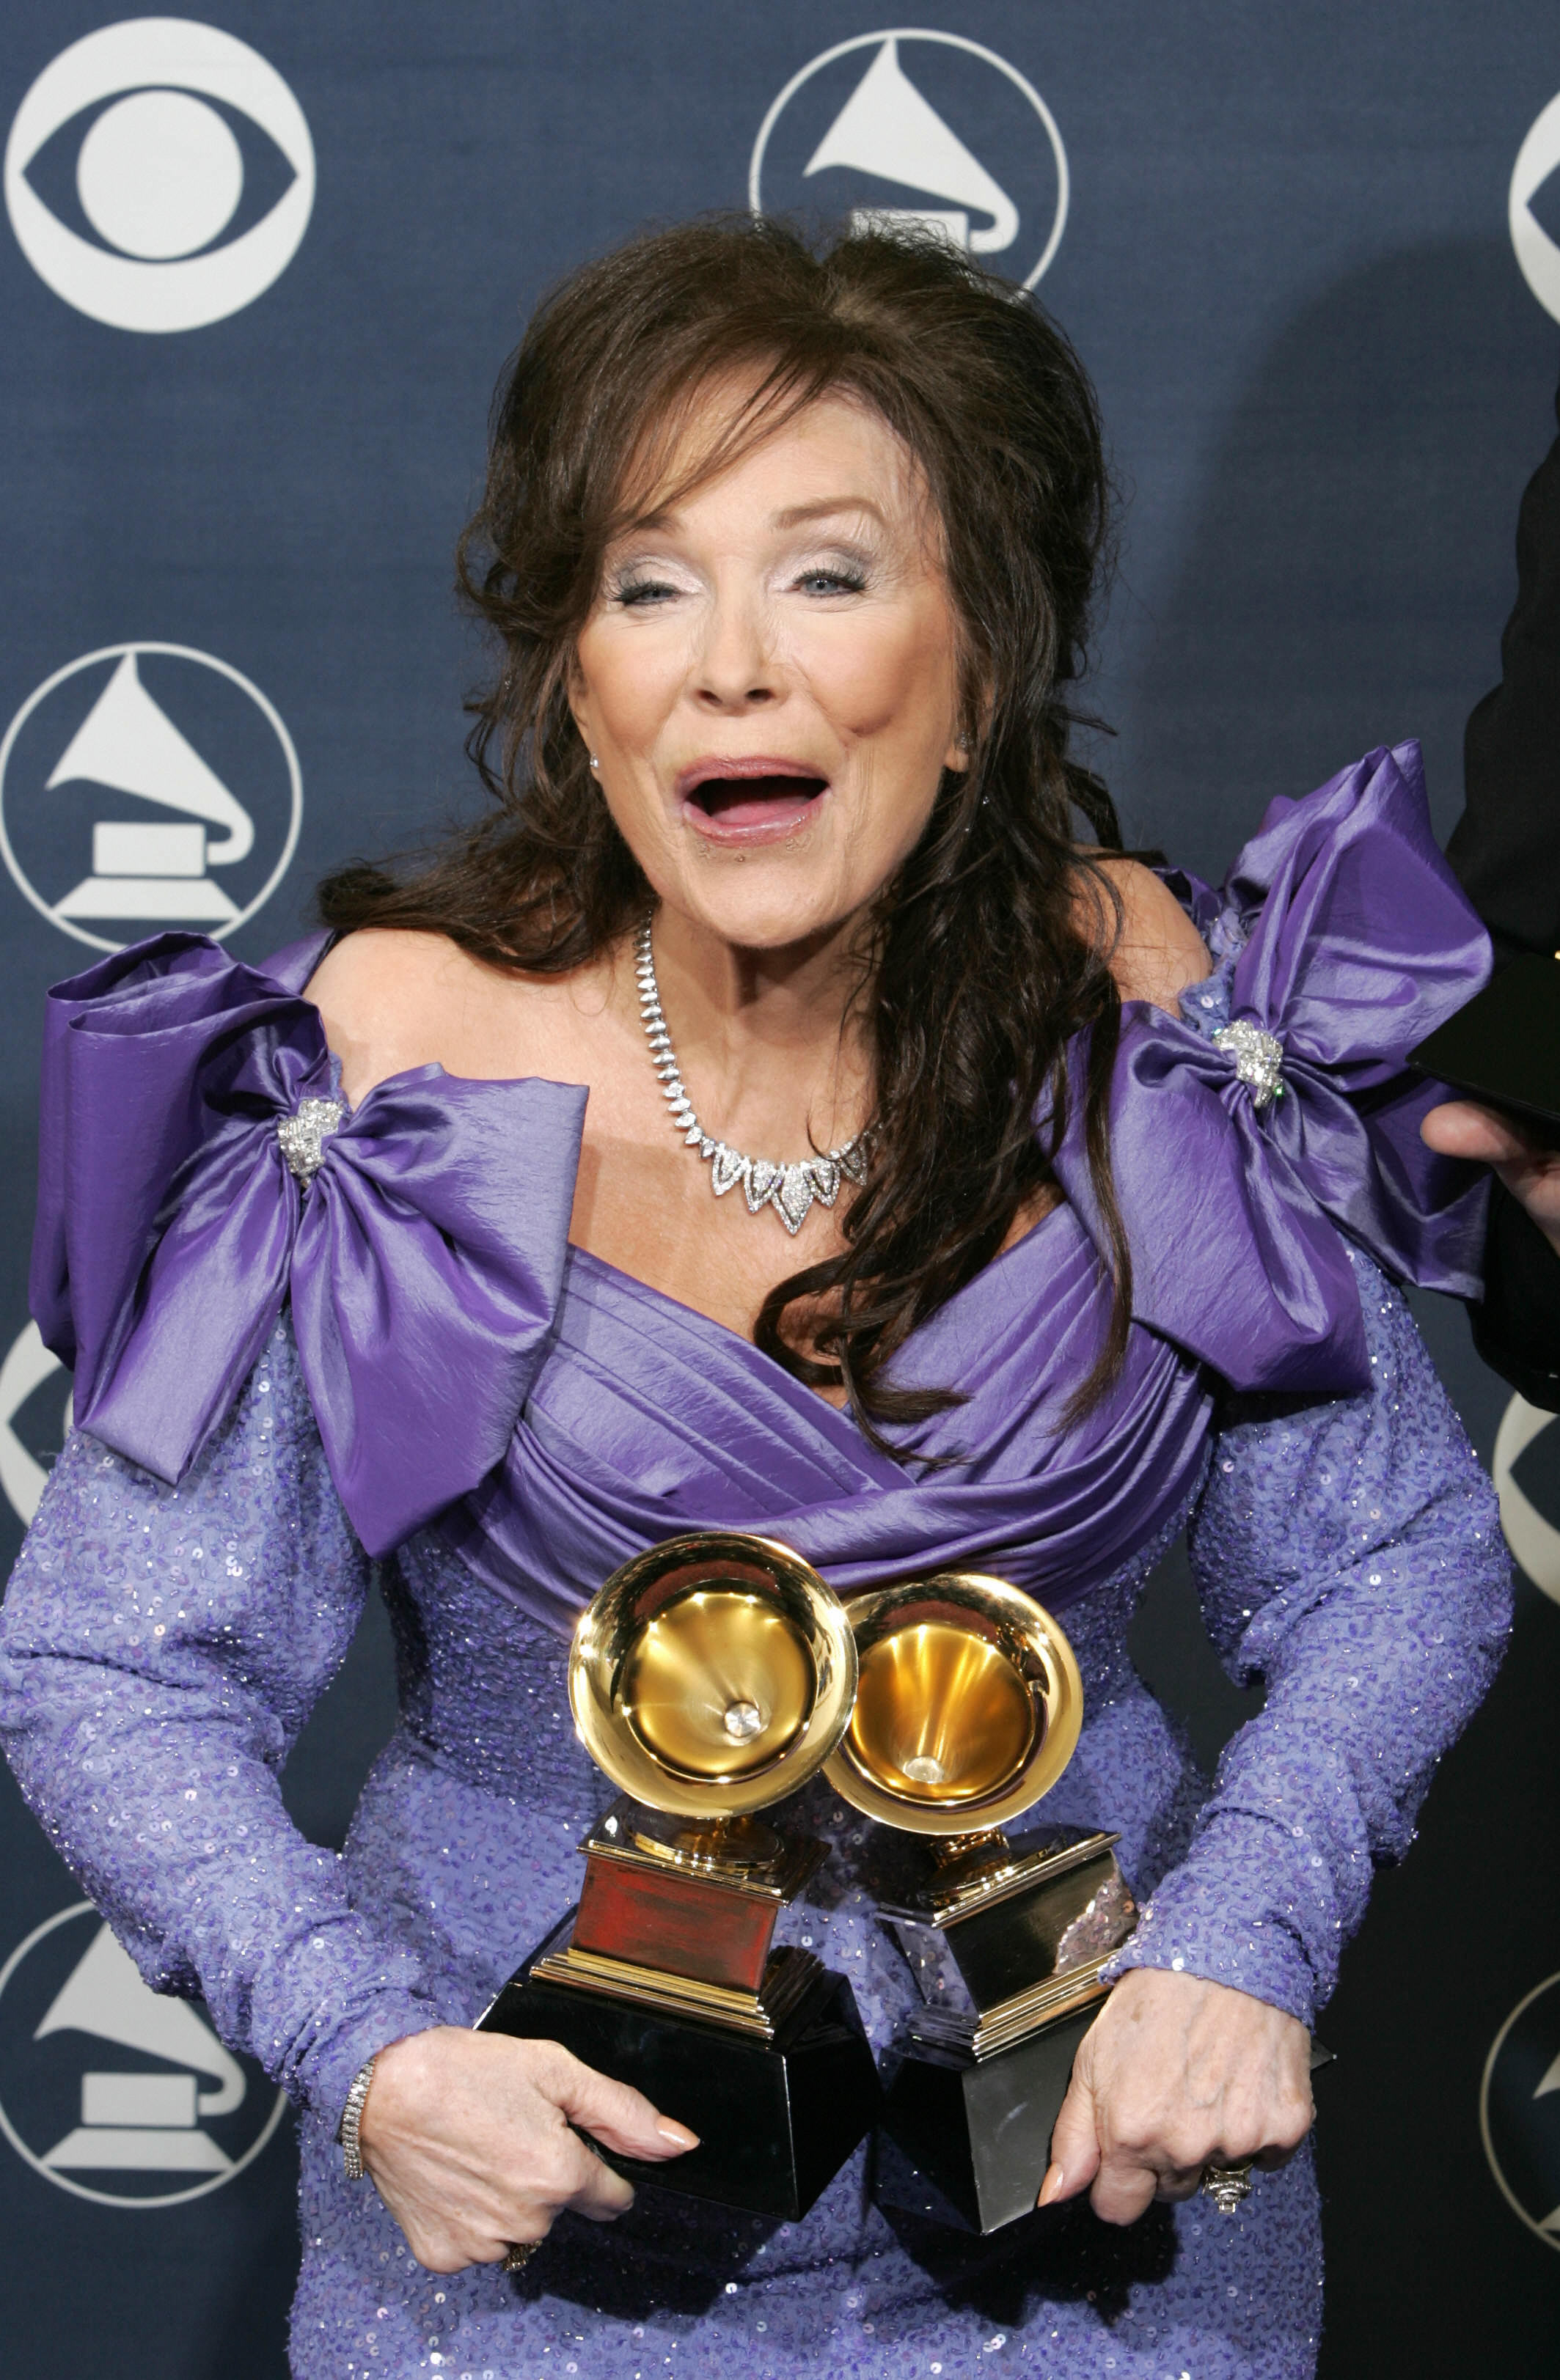 Loretta Lynne poses with the awards she won at the Grammys ceremony in Los Angeles on February 13, 2005. | Source: Getty Images